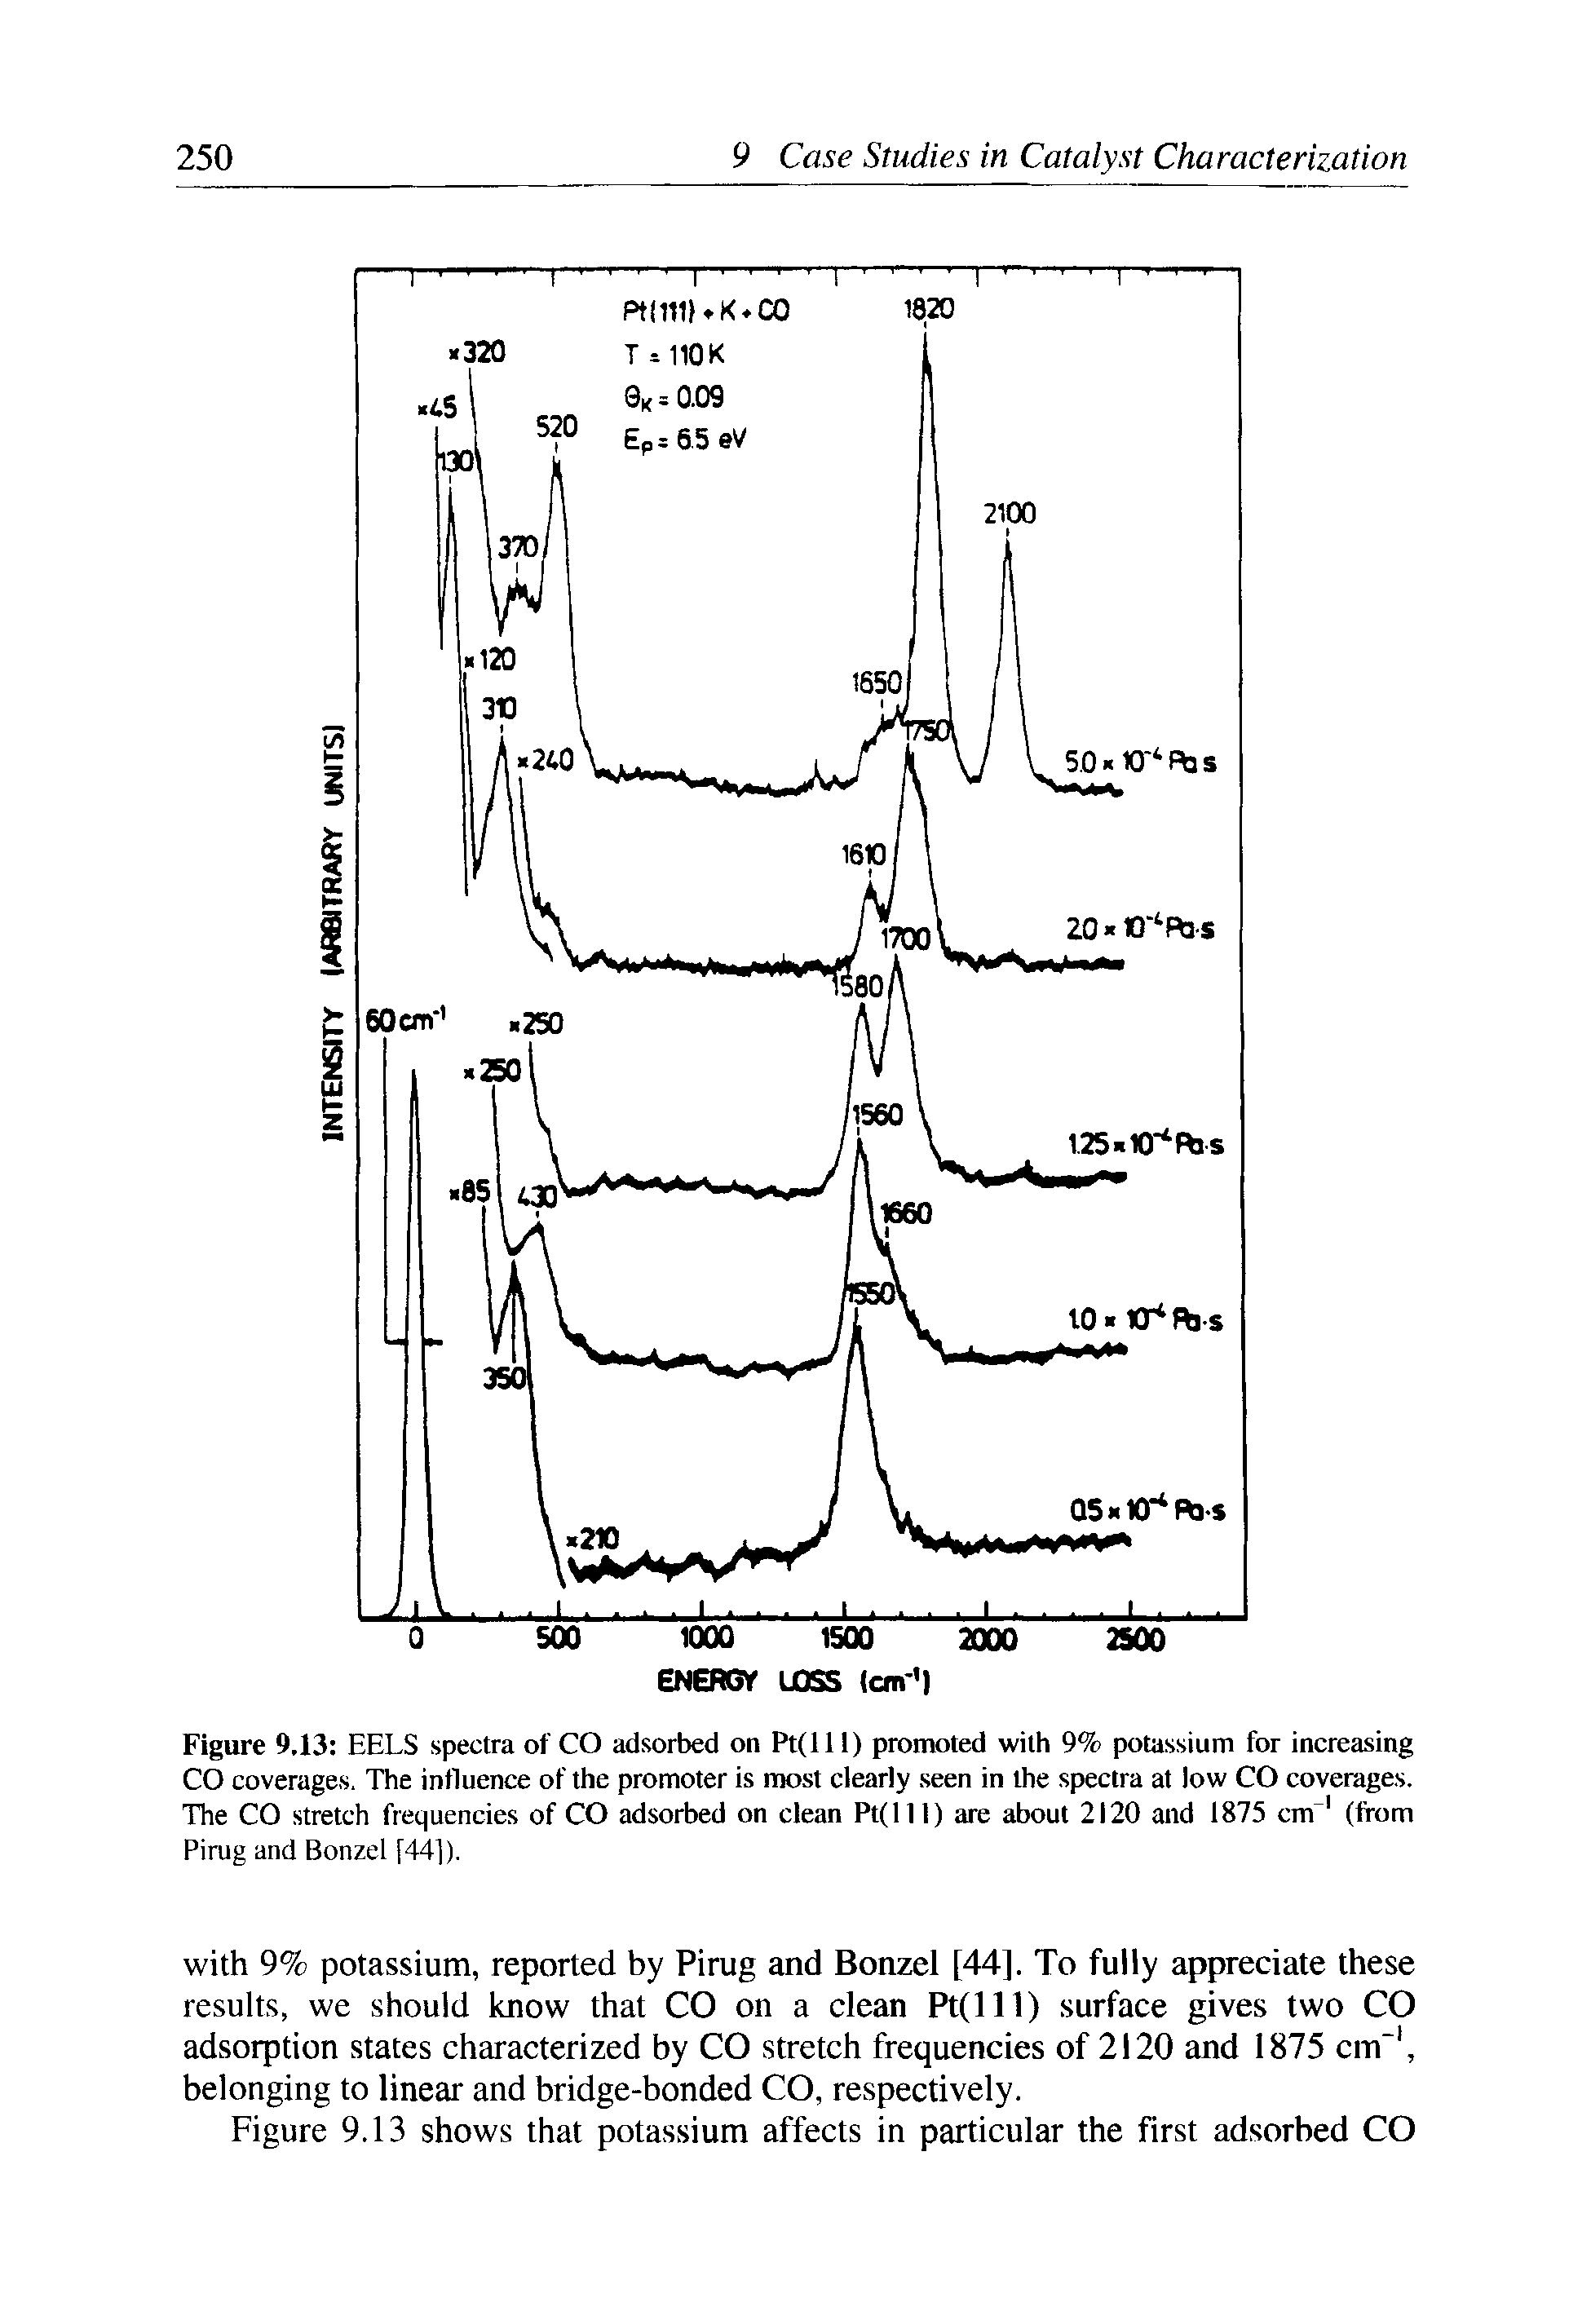 Figure 9.13 EELS spectra of CO adsorbed on Pt(111) promoted with 9% potassium for increasing CO coverages. The influence of the promoter is most clearly seen in the spectra at low CO coverages. The CO stretch frequencies of CO adsorbed on clean Pt(lll) are about 2120 and 1875 cm 1 (from Pirug and Bonzel [441).